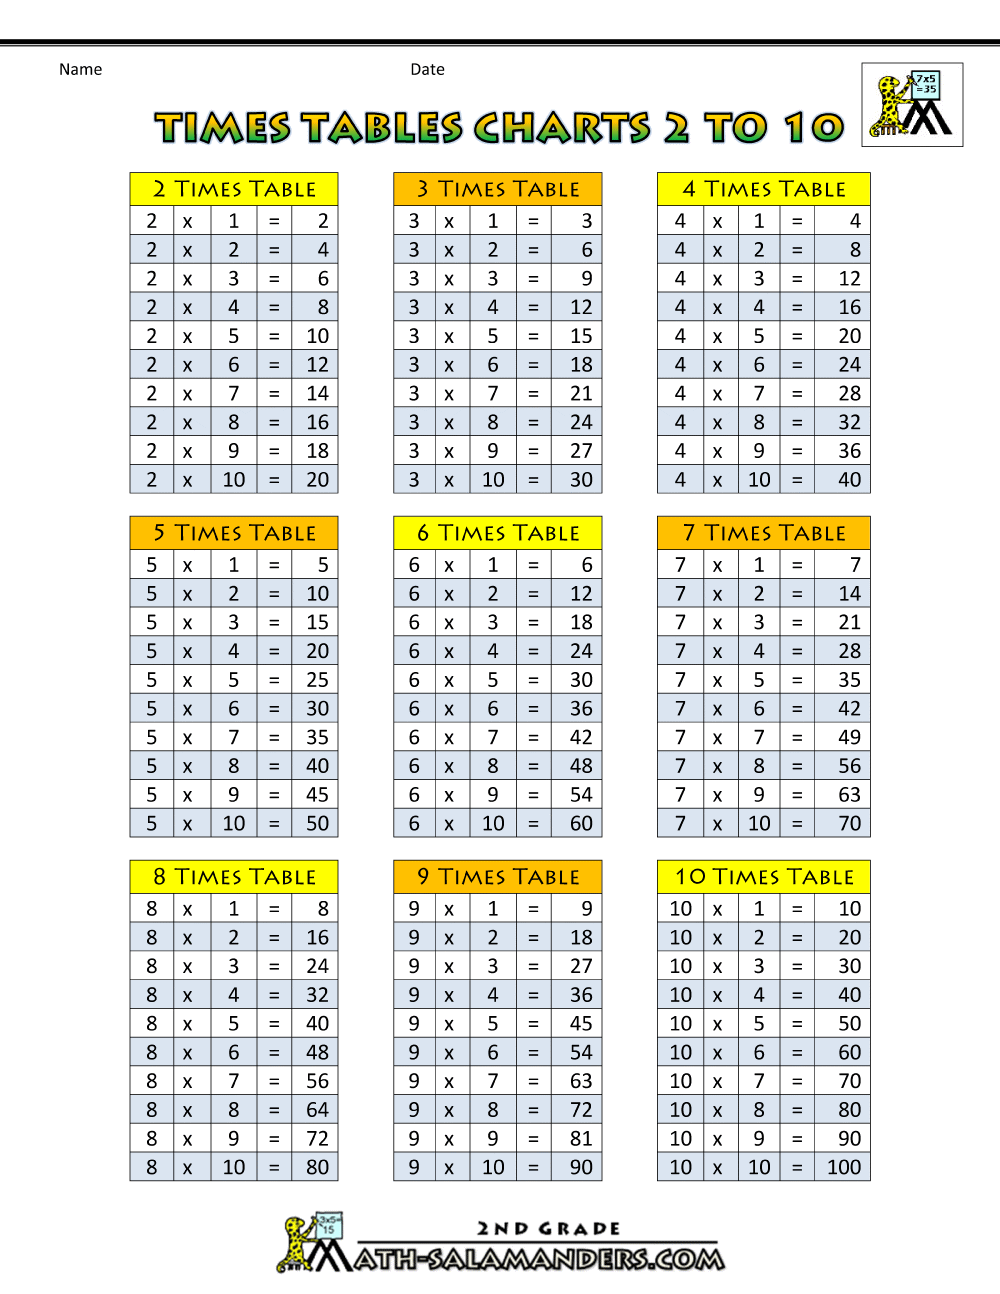 Times Tables Charts up to 12 times table